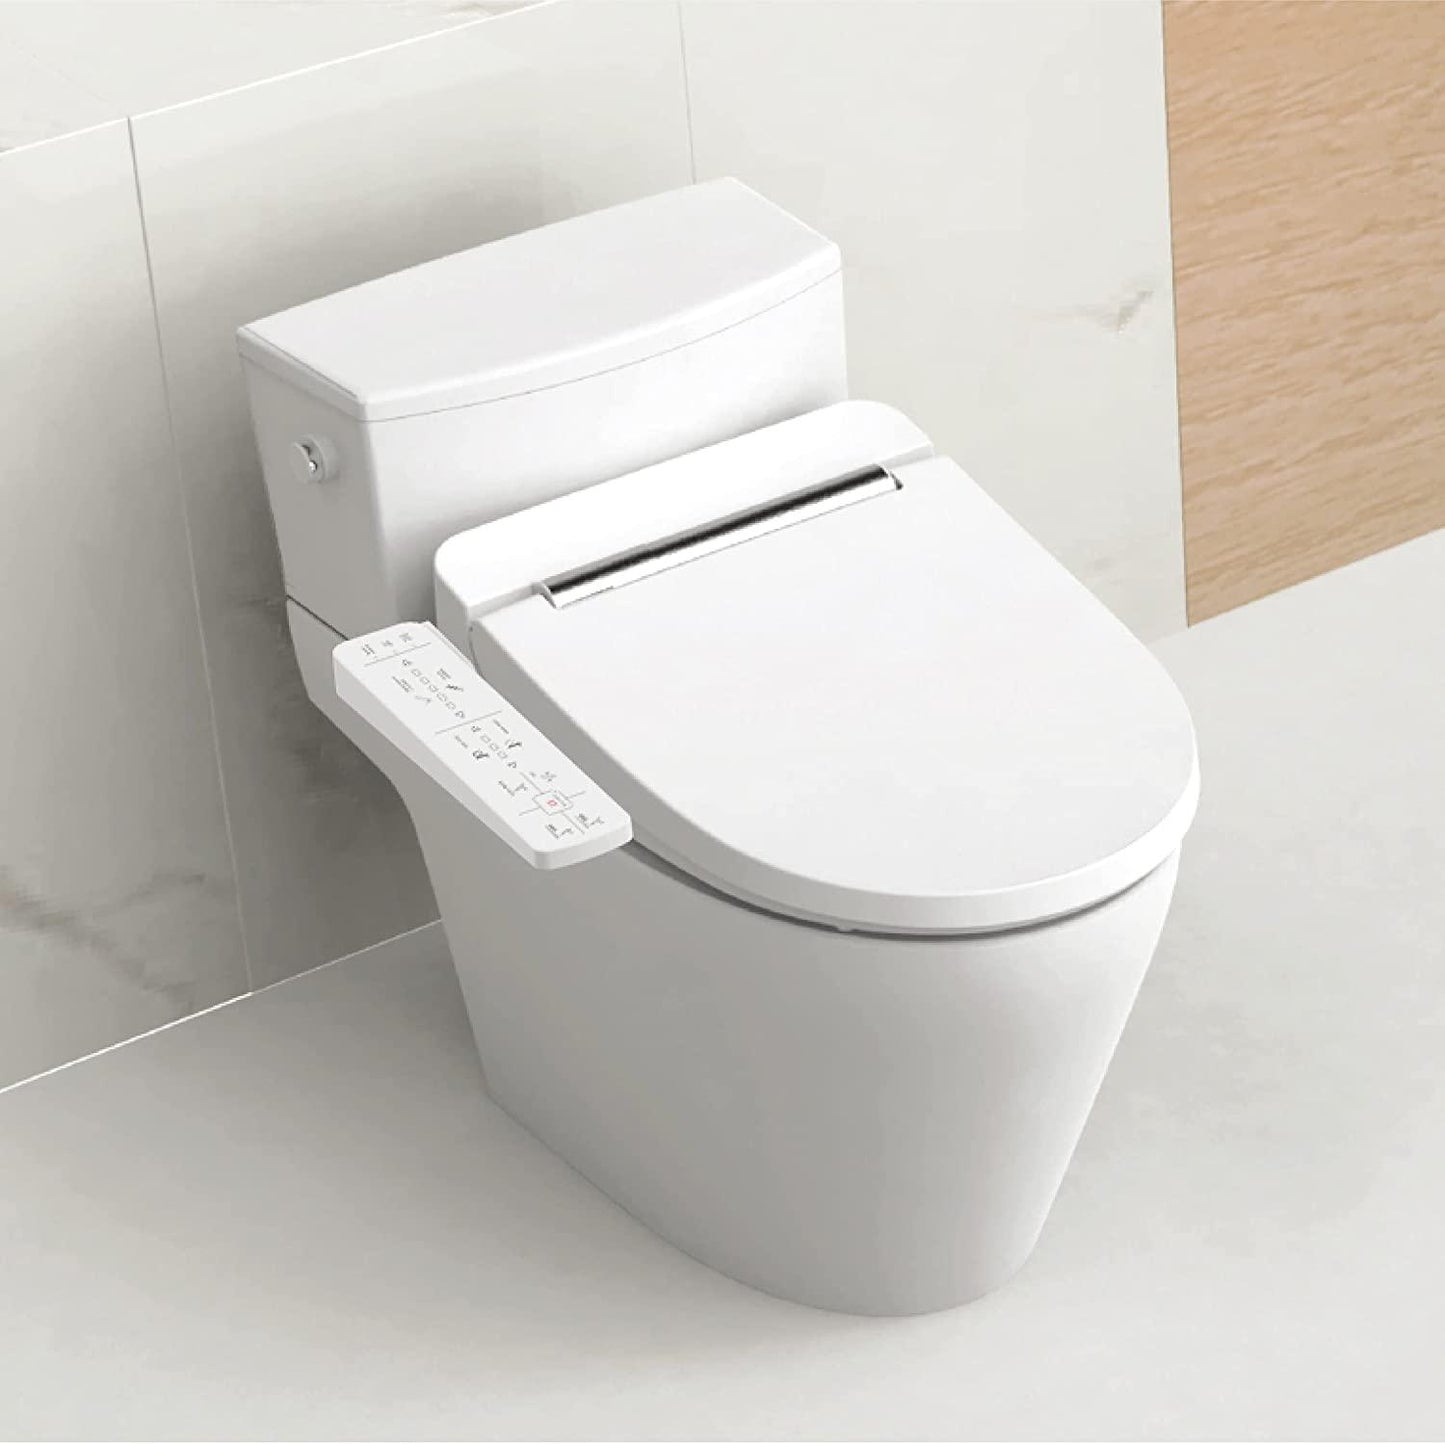 VOVO VB-3000S Electronic Bidet, Made in Korea, LED Nightlight,Full Stainless Nozzle,Heated Seat,Warm Dry and Water - YOURISHOP.COM